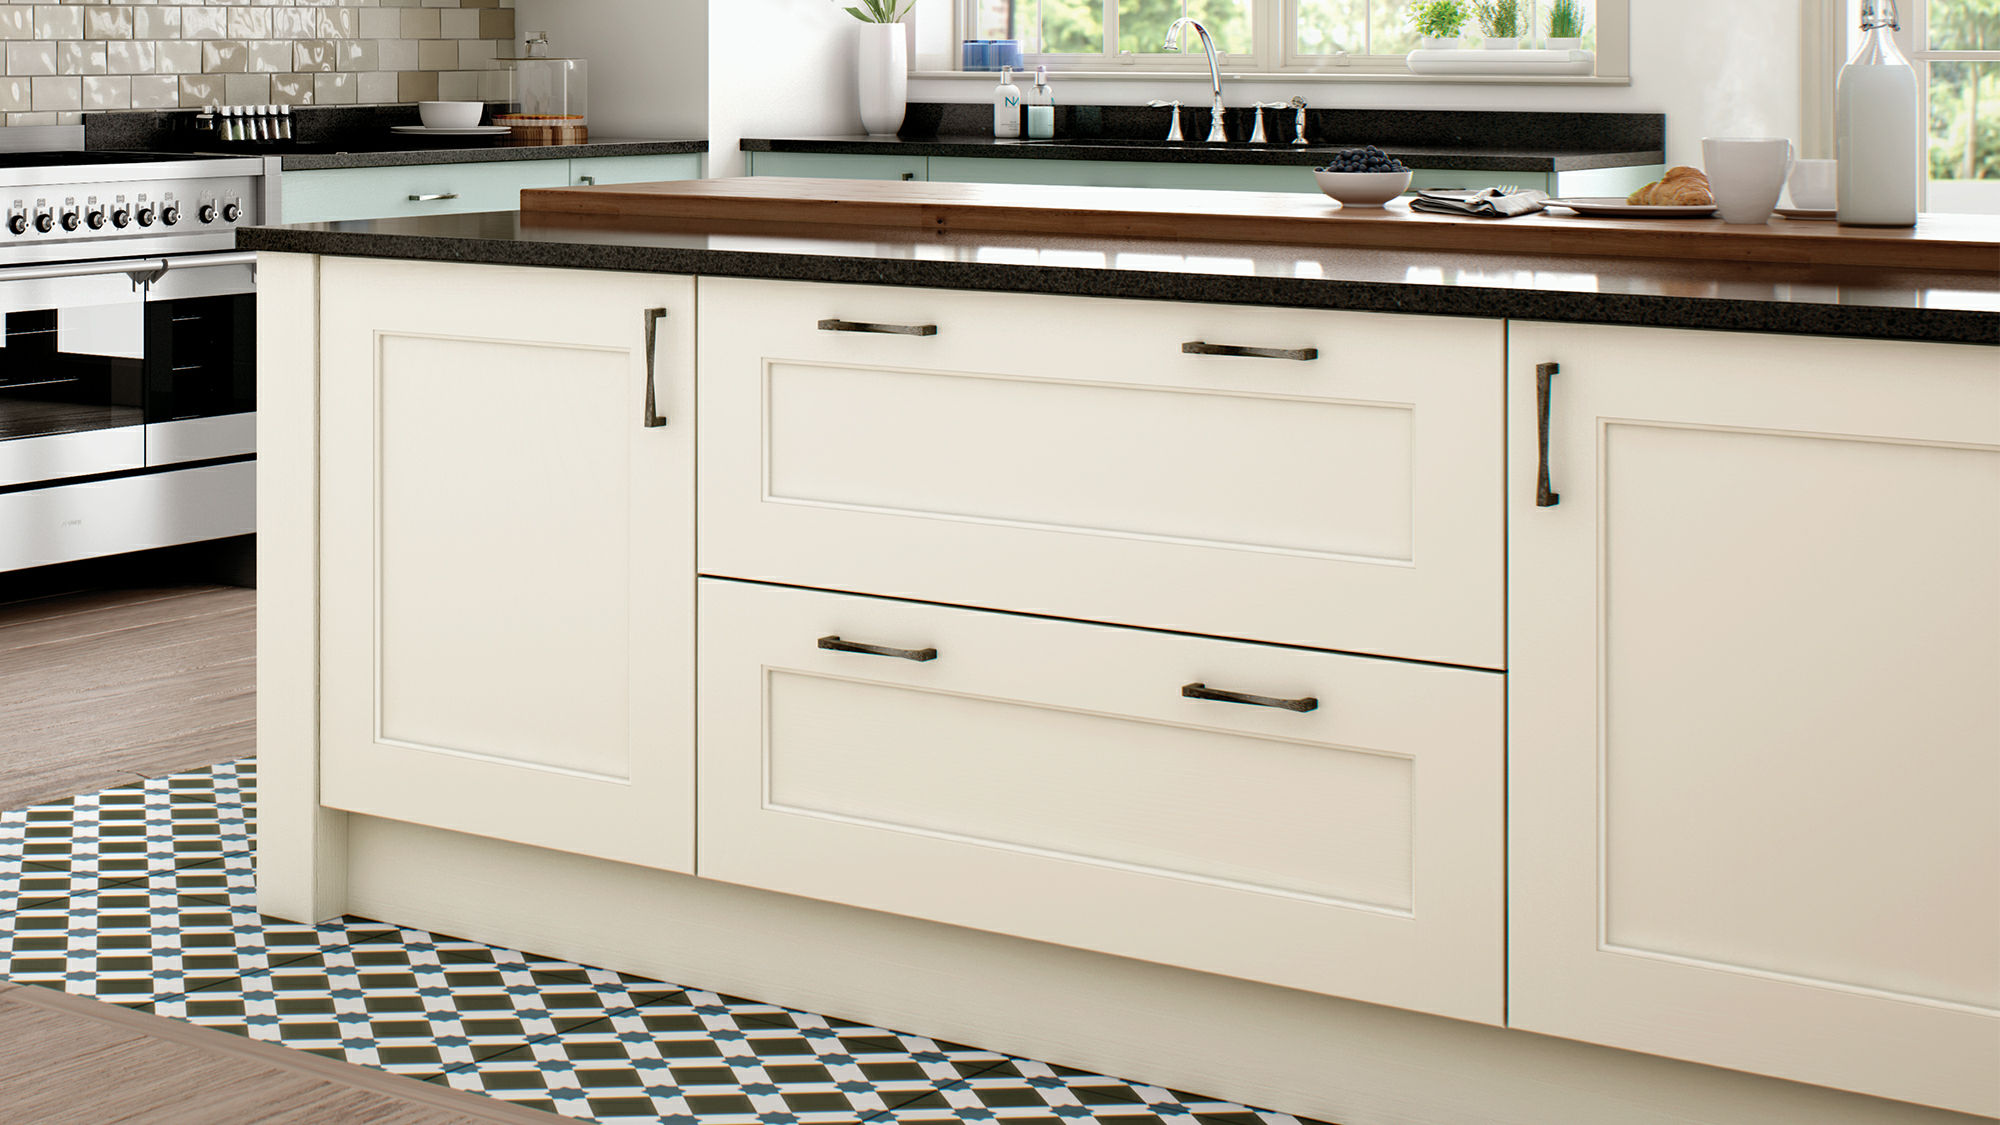 Wakefield solid wood ivory kitchen highlighting traditional craftsmanship and modern appeal